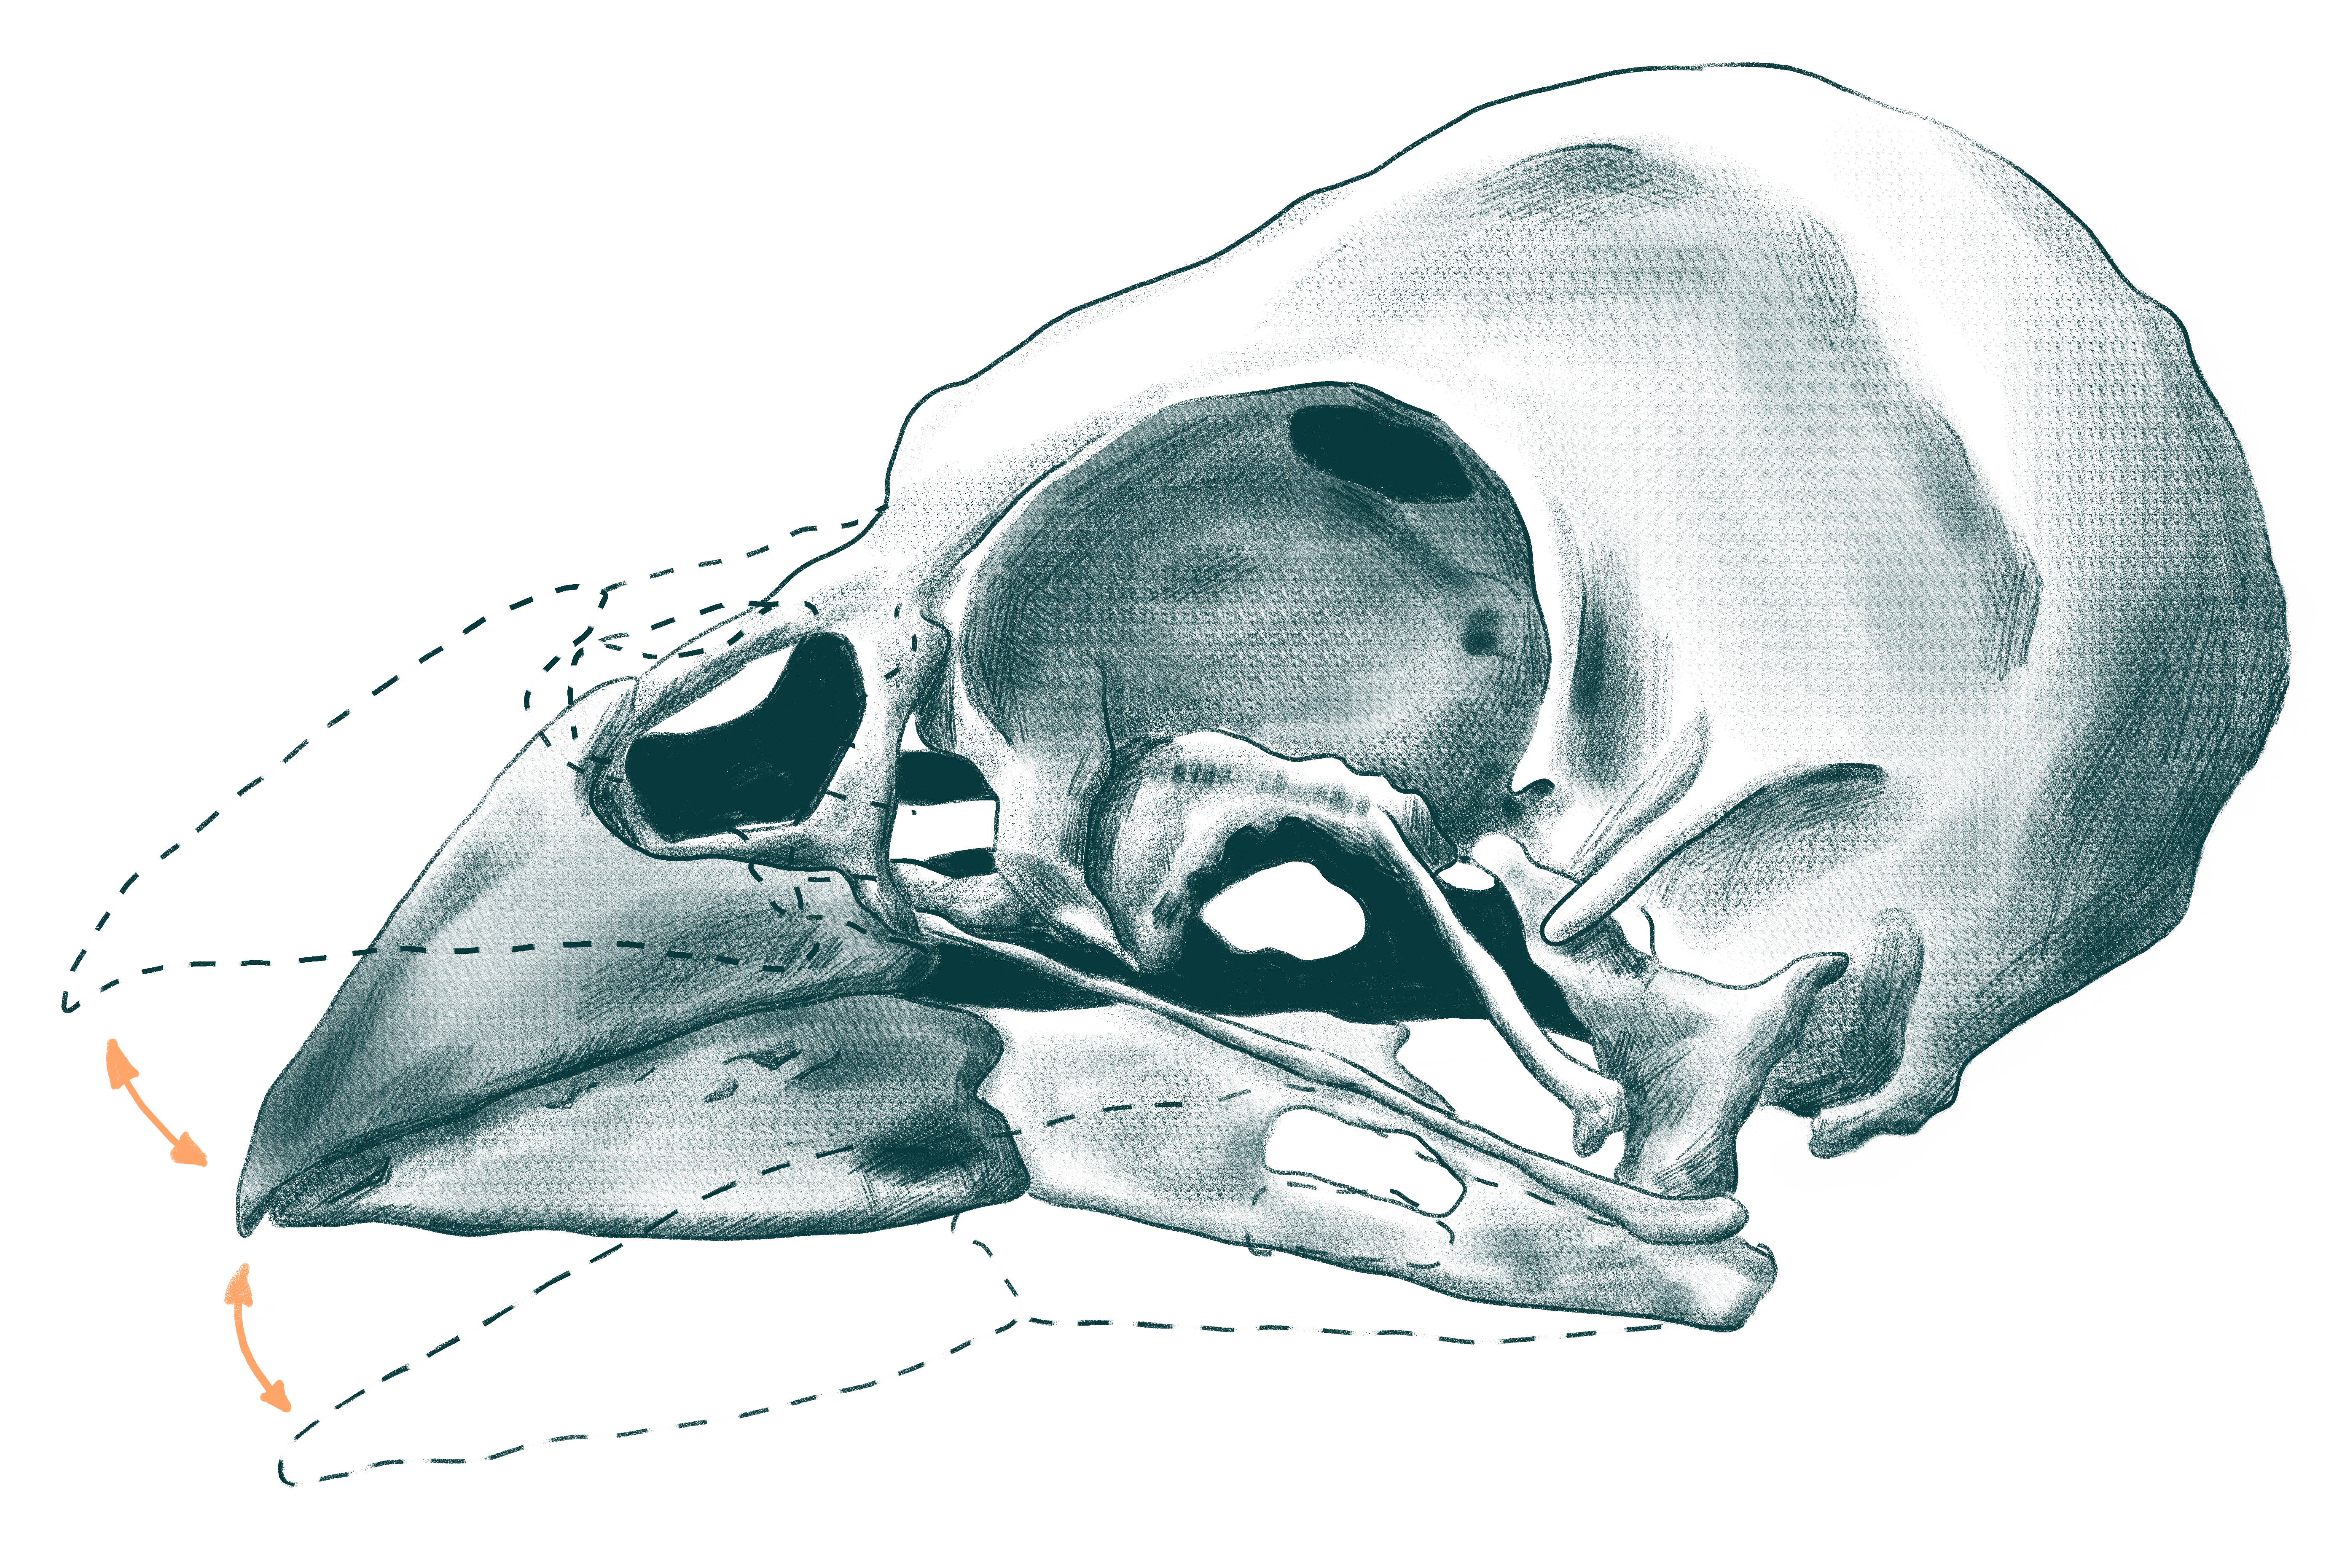 Drawing of a canary skull with arrows indicating up and down movements of upper and lower beak.